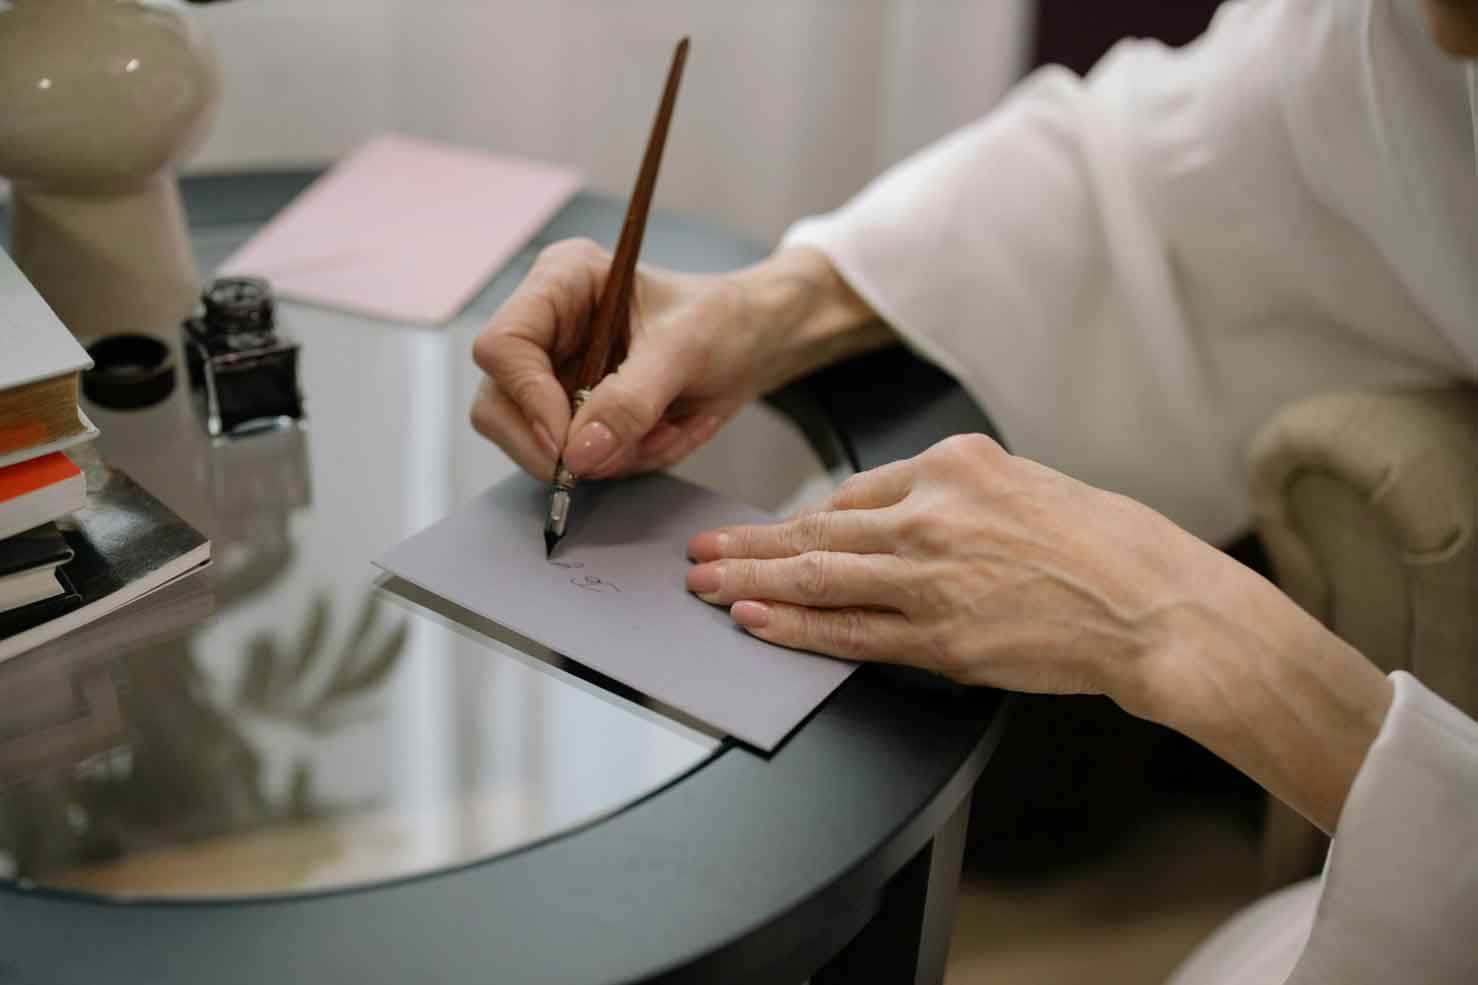 Woman writes a letter using a calligraphy pen to showcase a formal letter of recommendation that students need for their college application process.